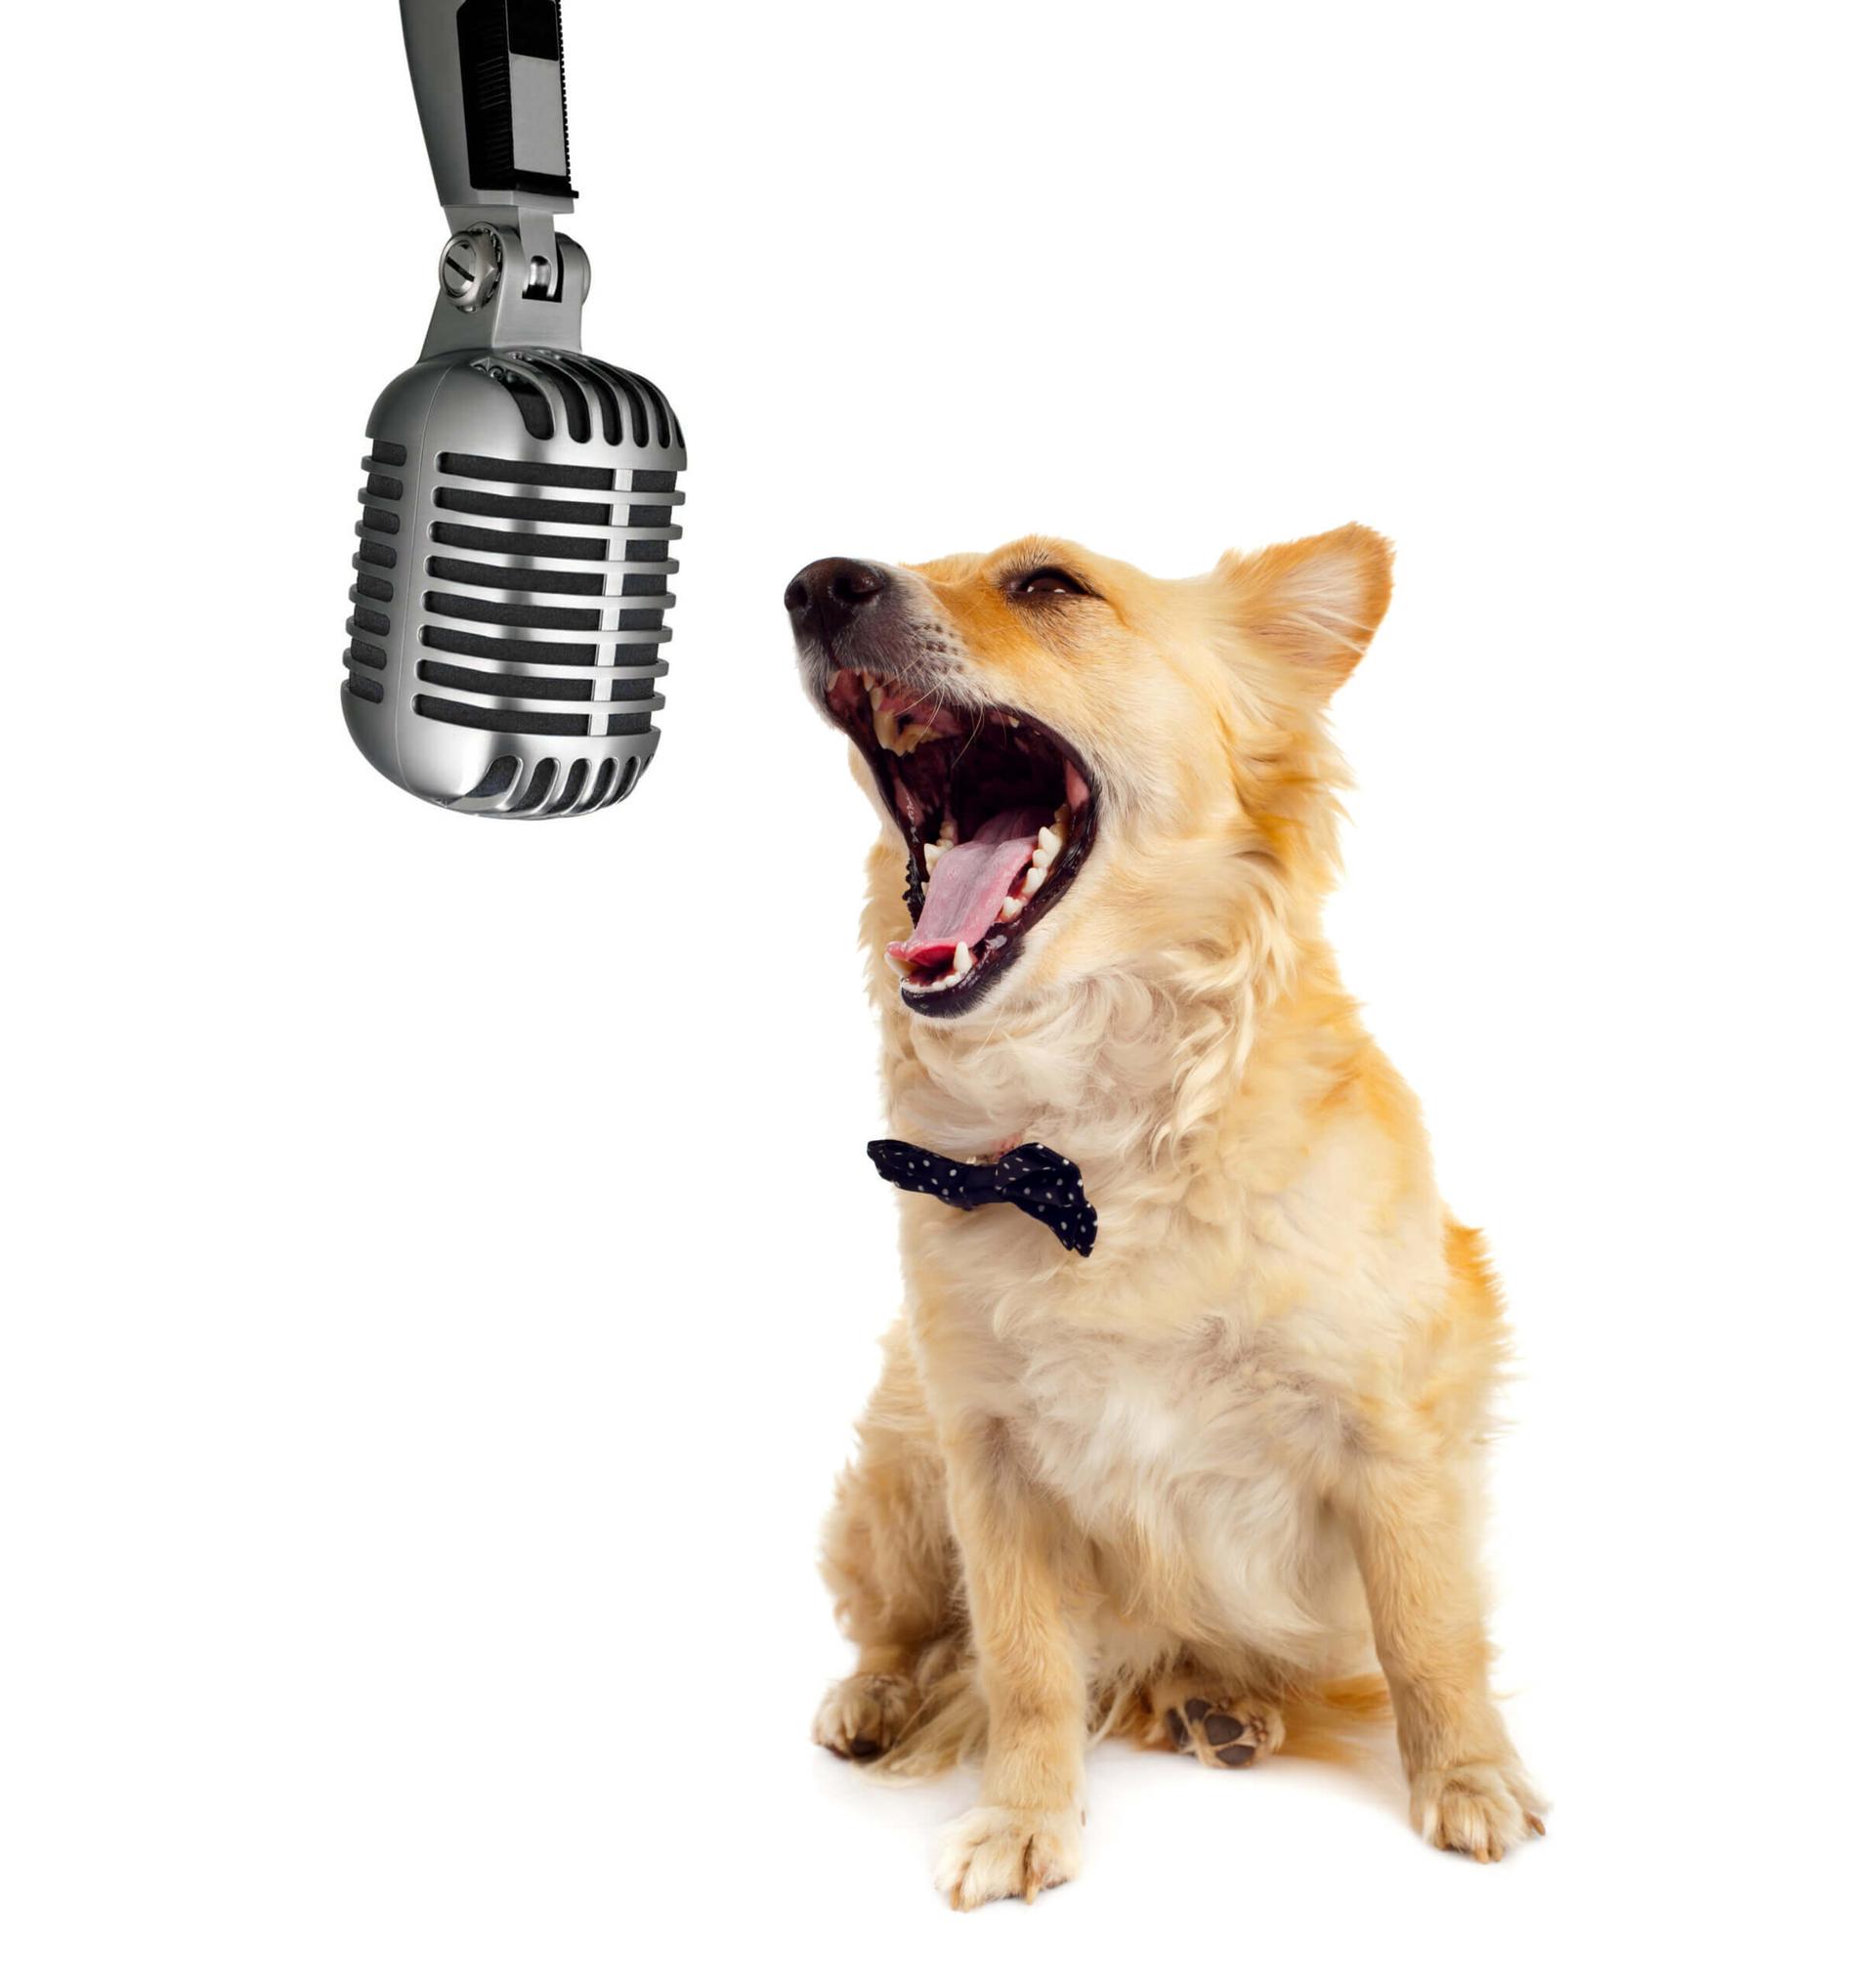 Brown and white short coated dog talking into podcast microphone
